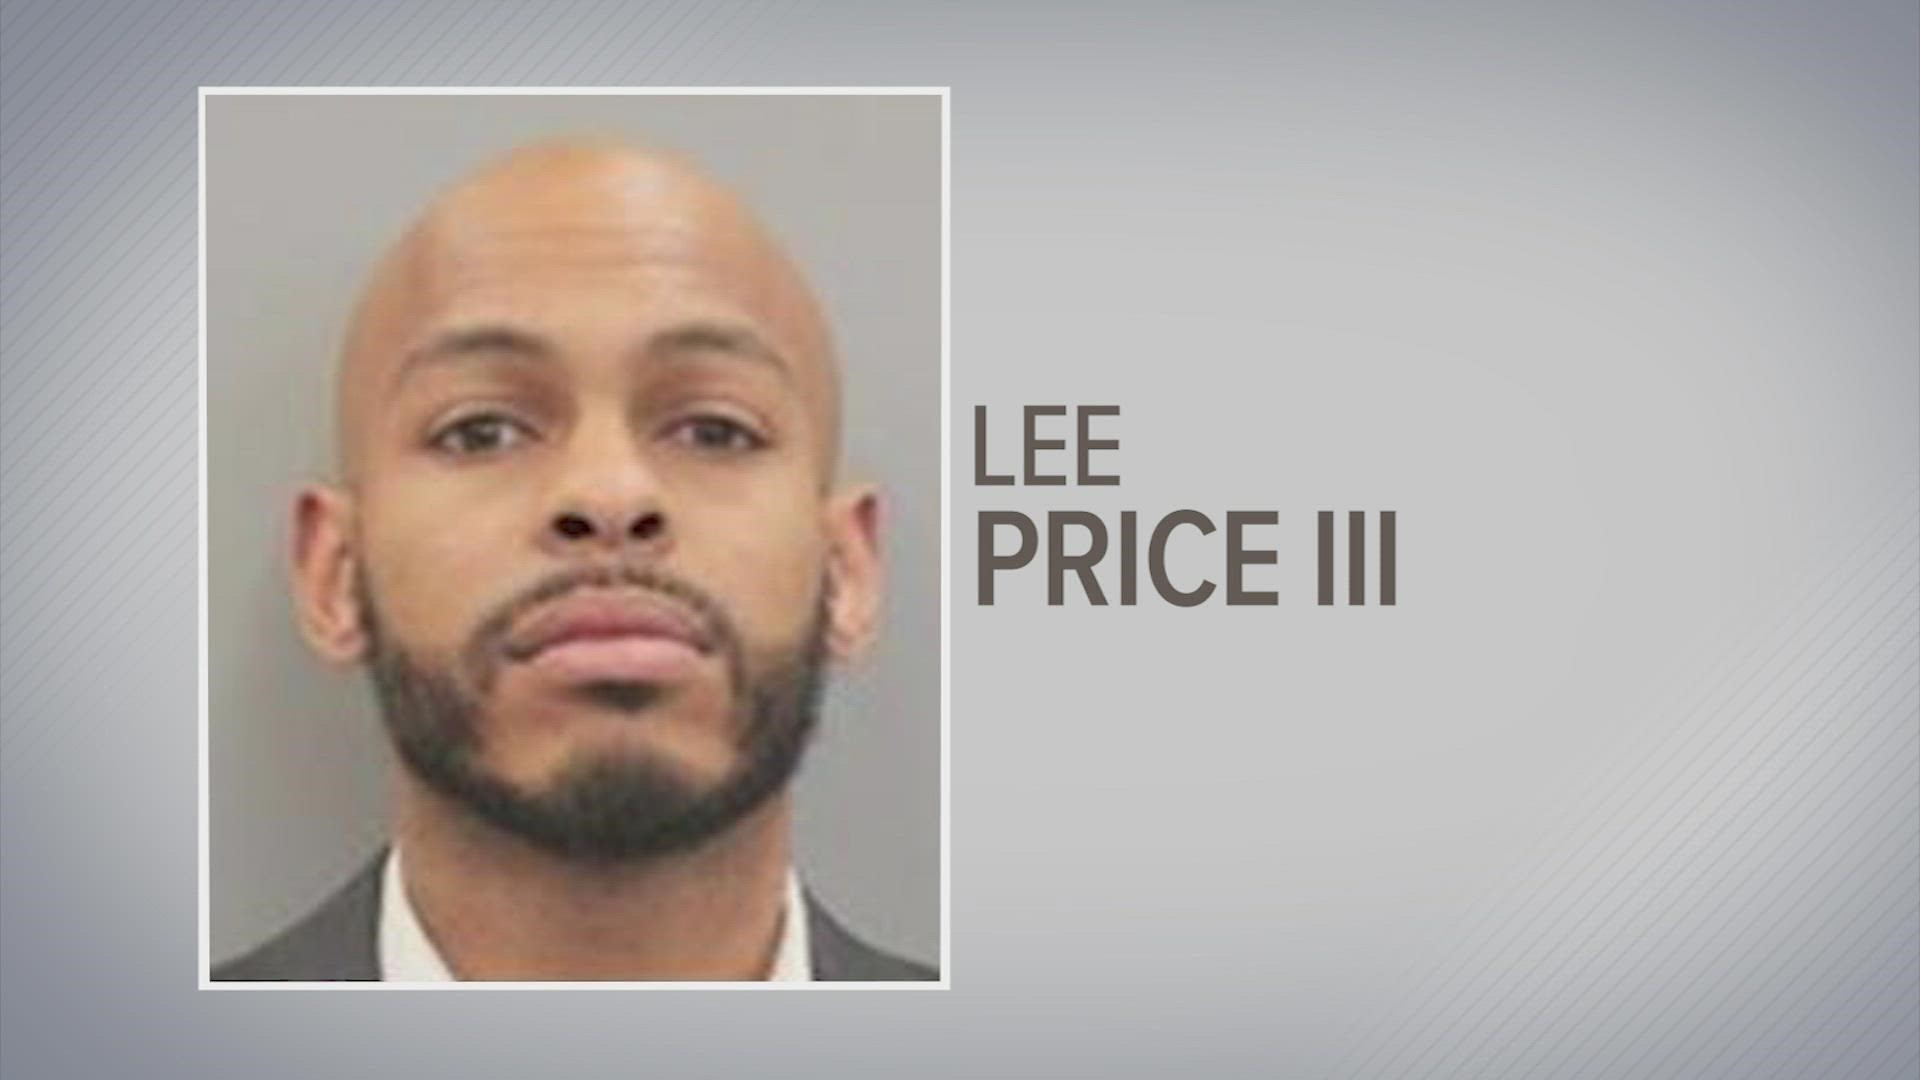 Federal prosecutors say 30-year-old Lee Price III went on a massive spending spree that included a $200,000 Lamborghini Uras, a fancy pickup and strip clubs.